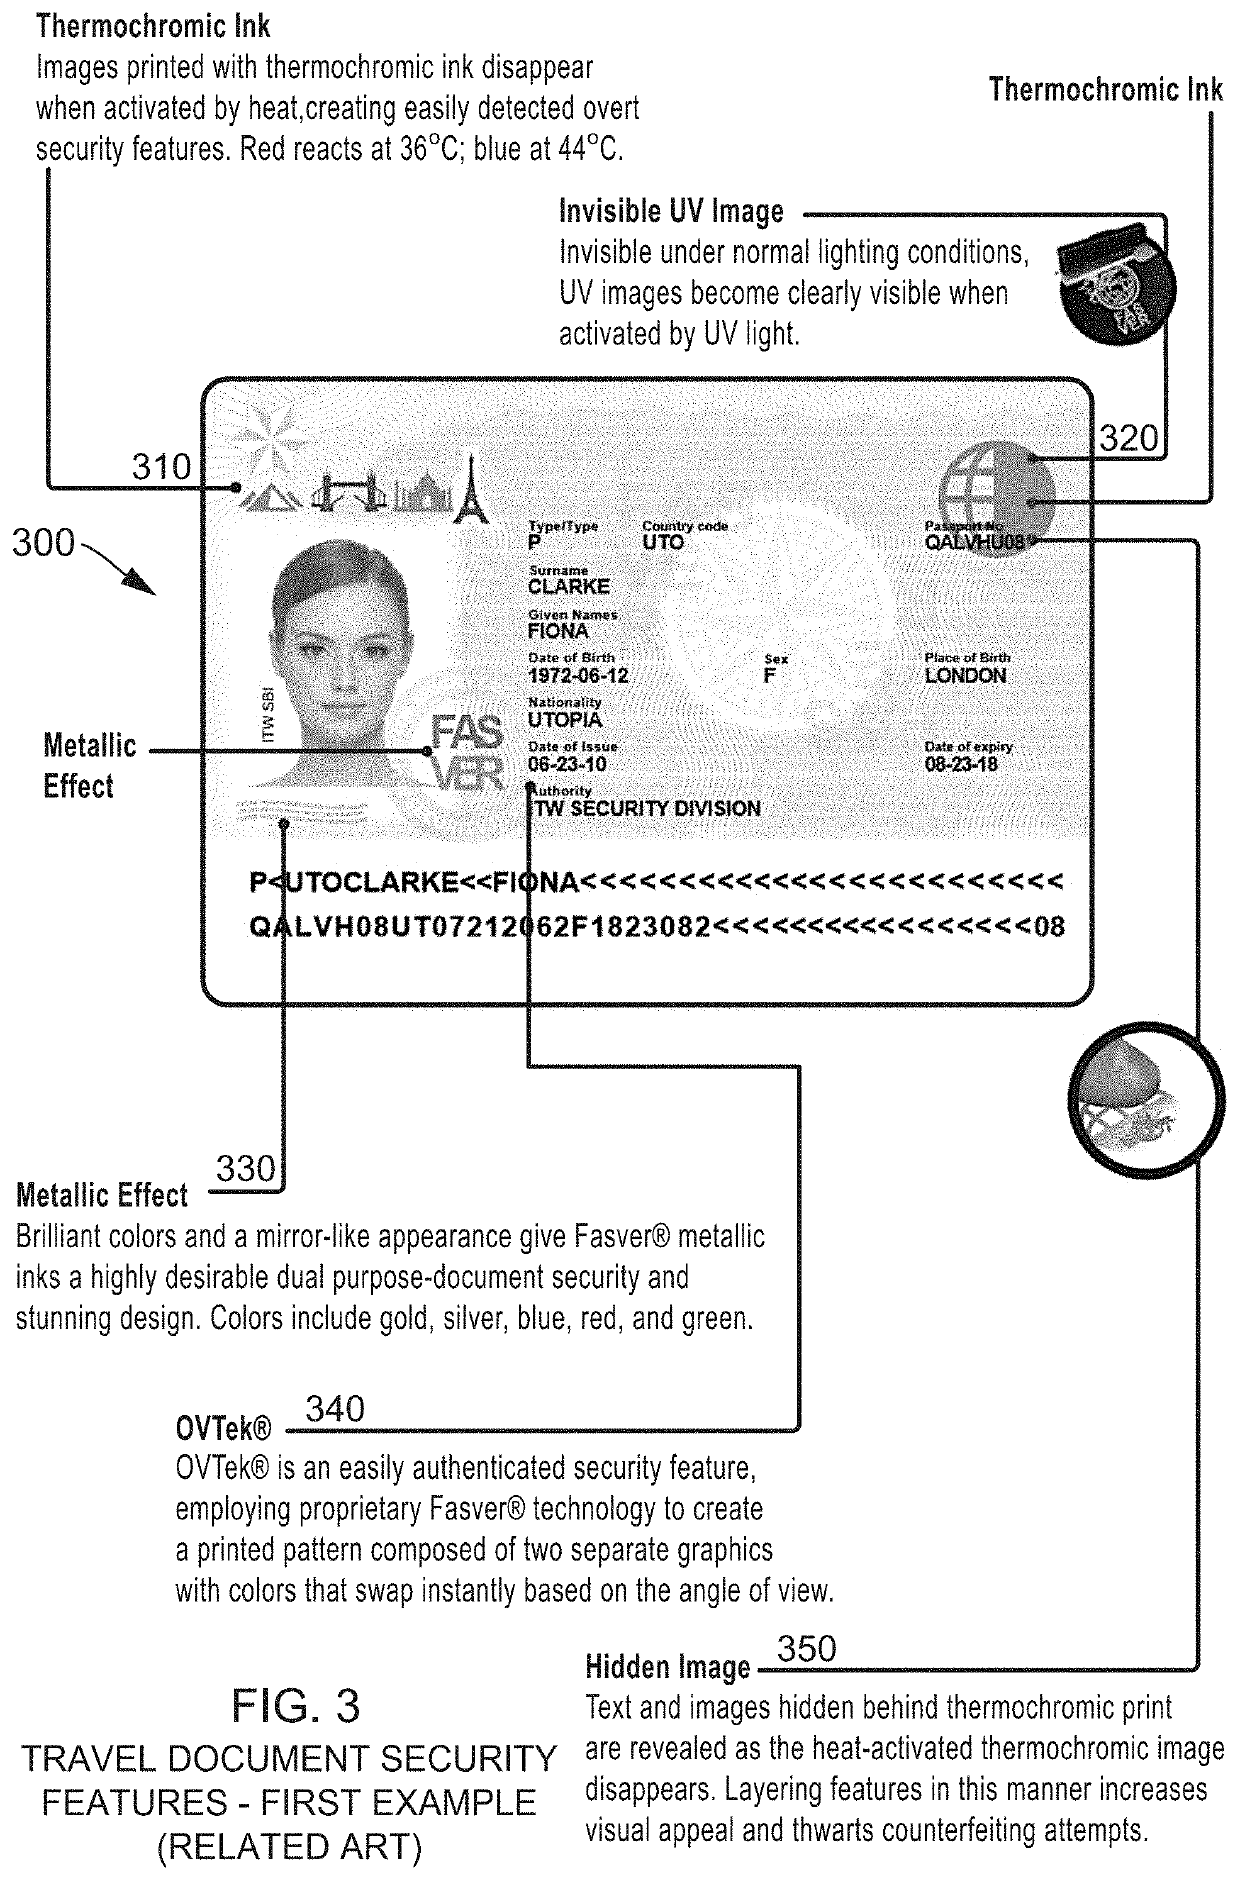 Travel document validation using artificial intelligence and unsupervised learning